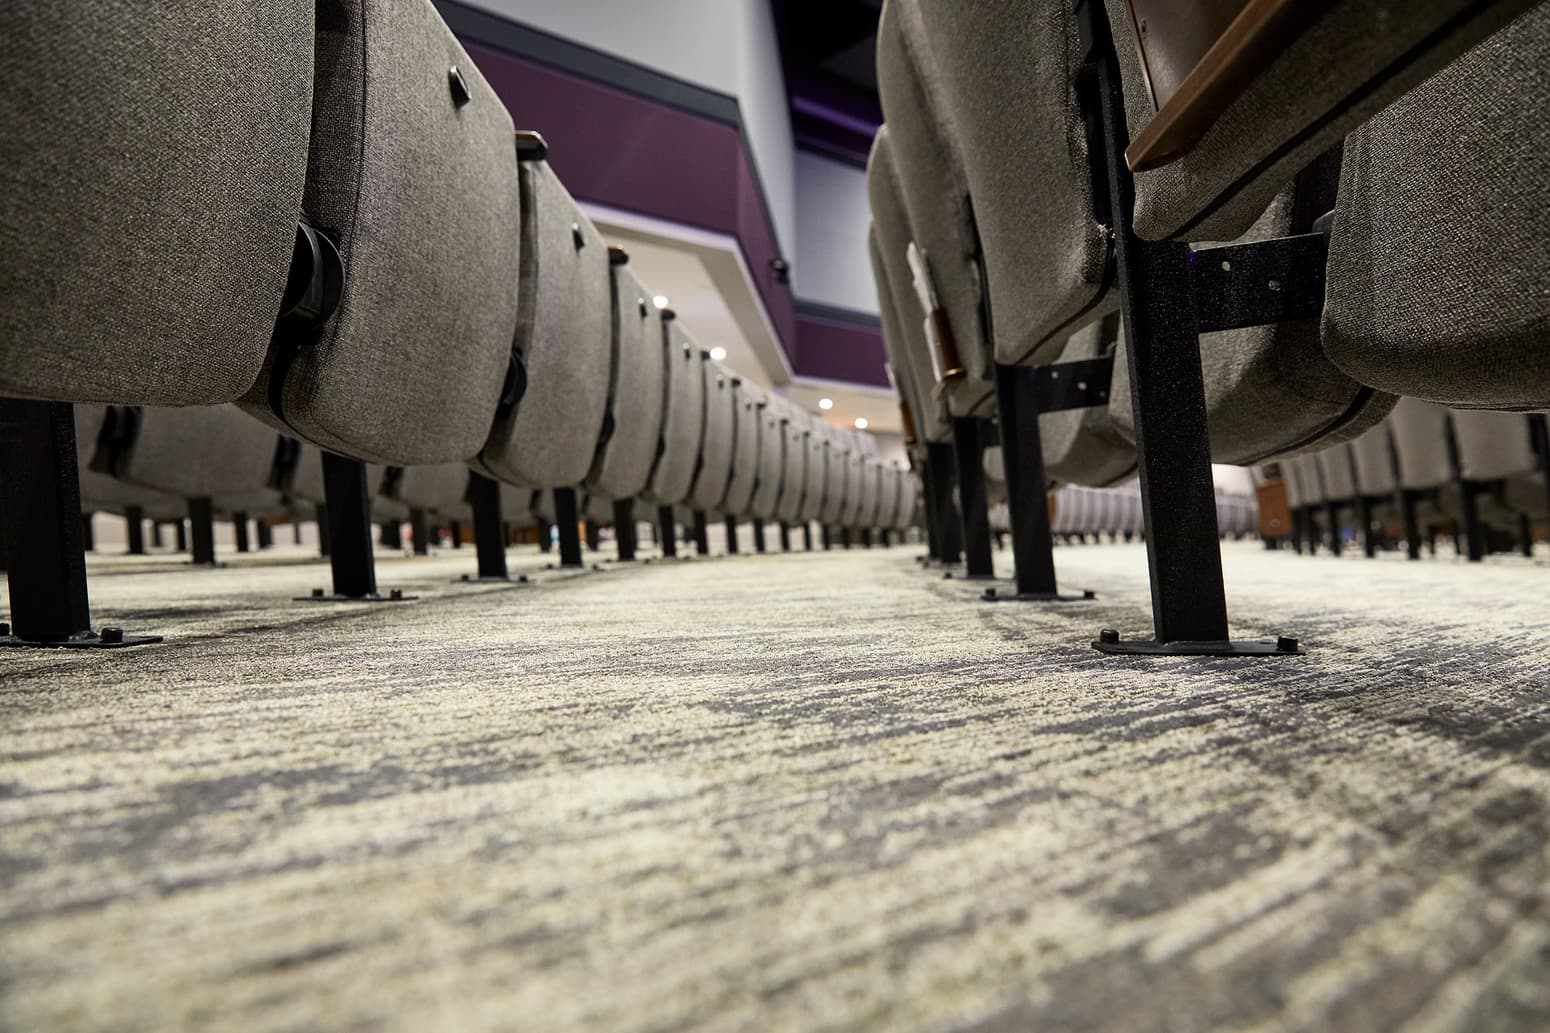 Flooring for an auditorium design project completed by Paragon 360.